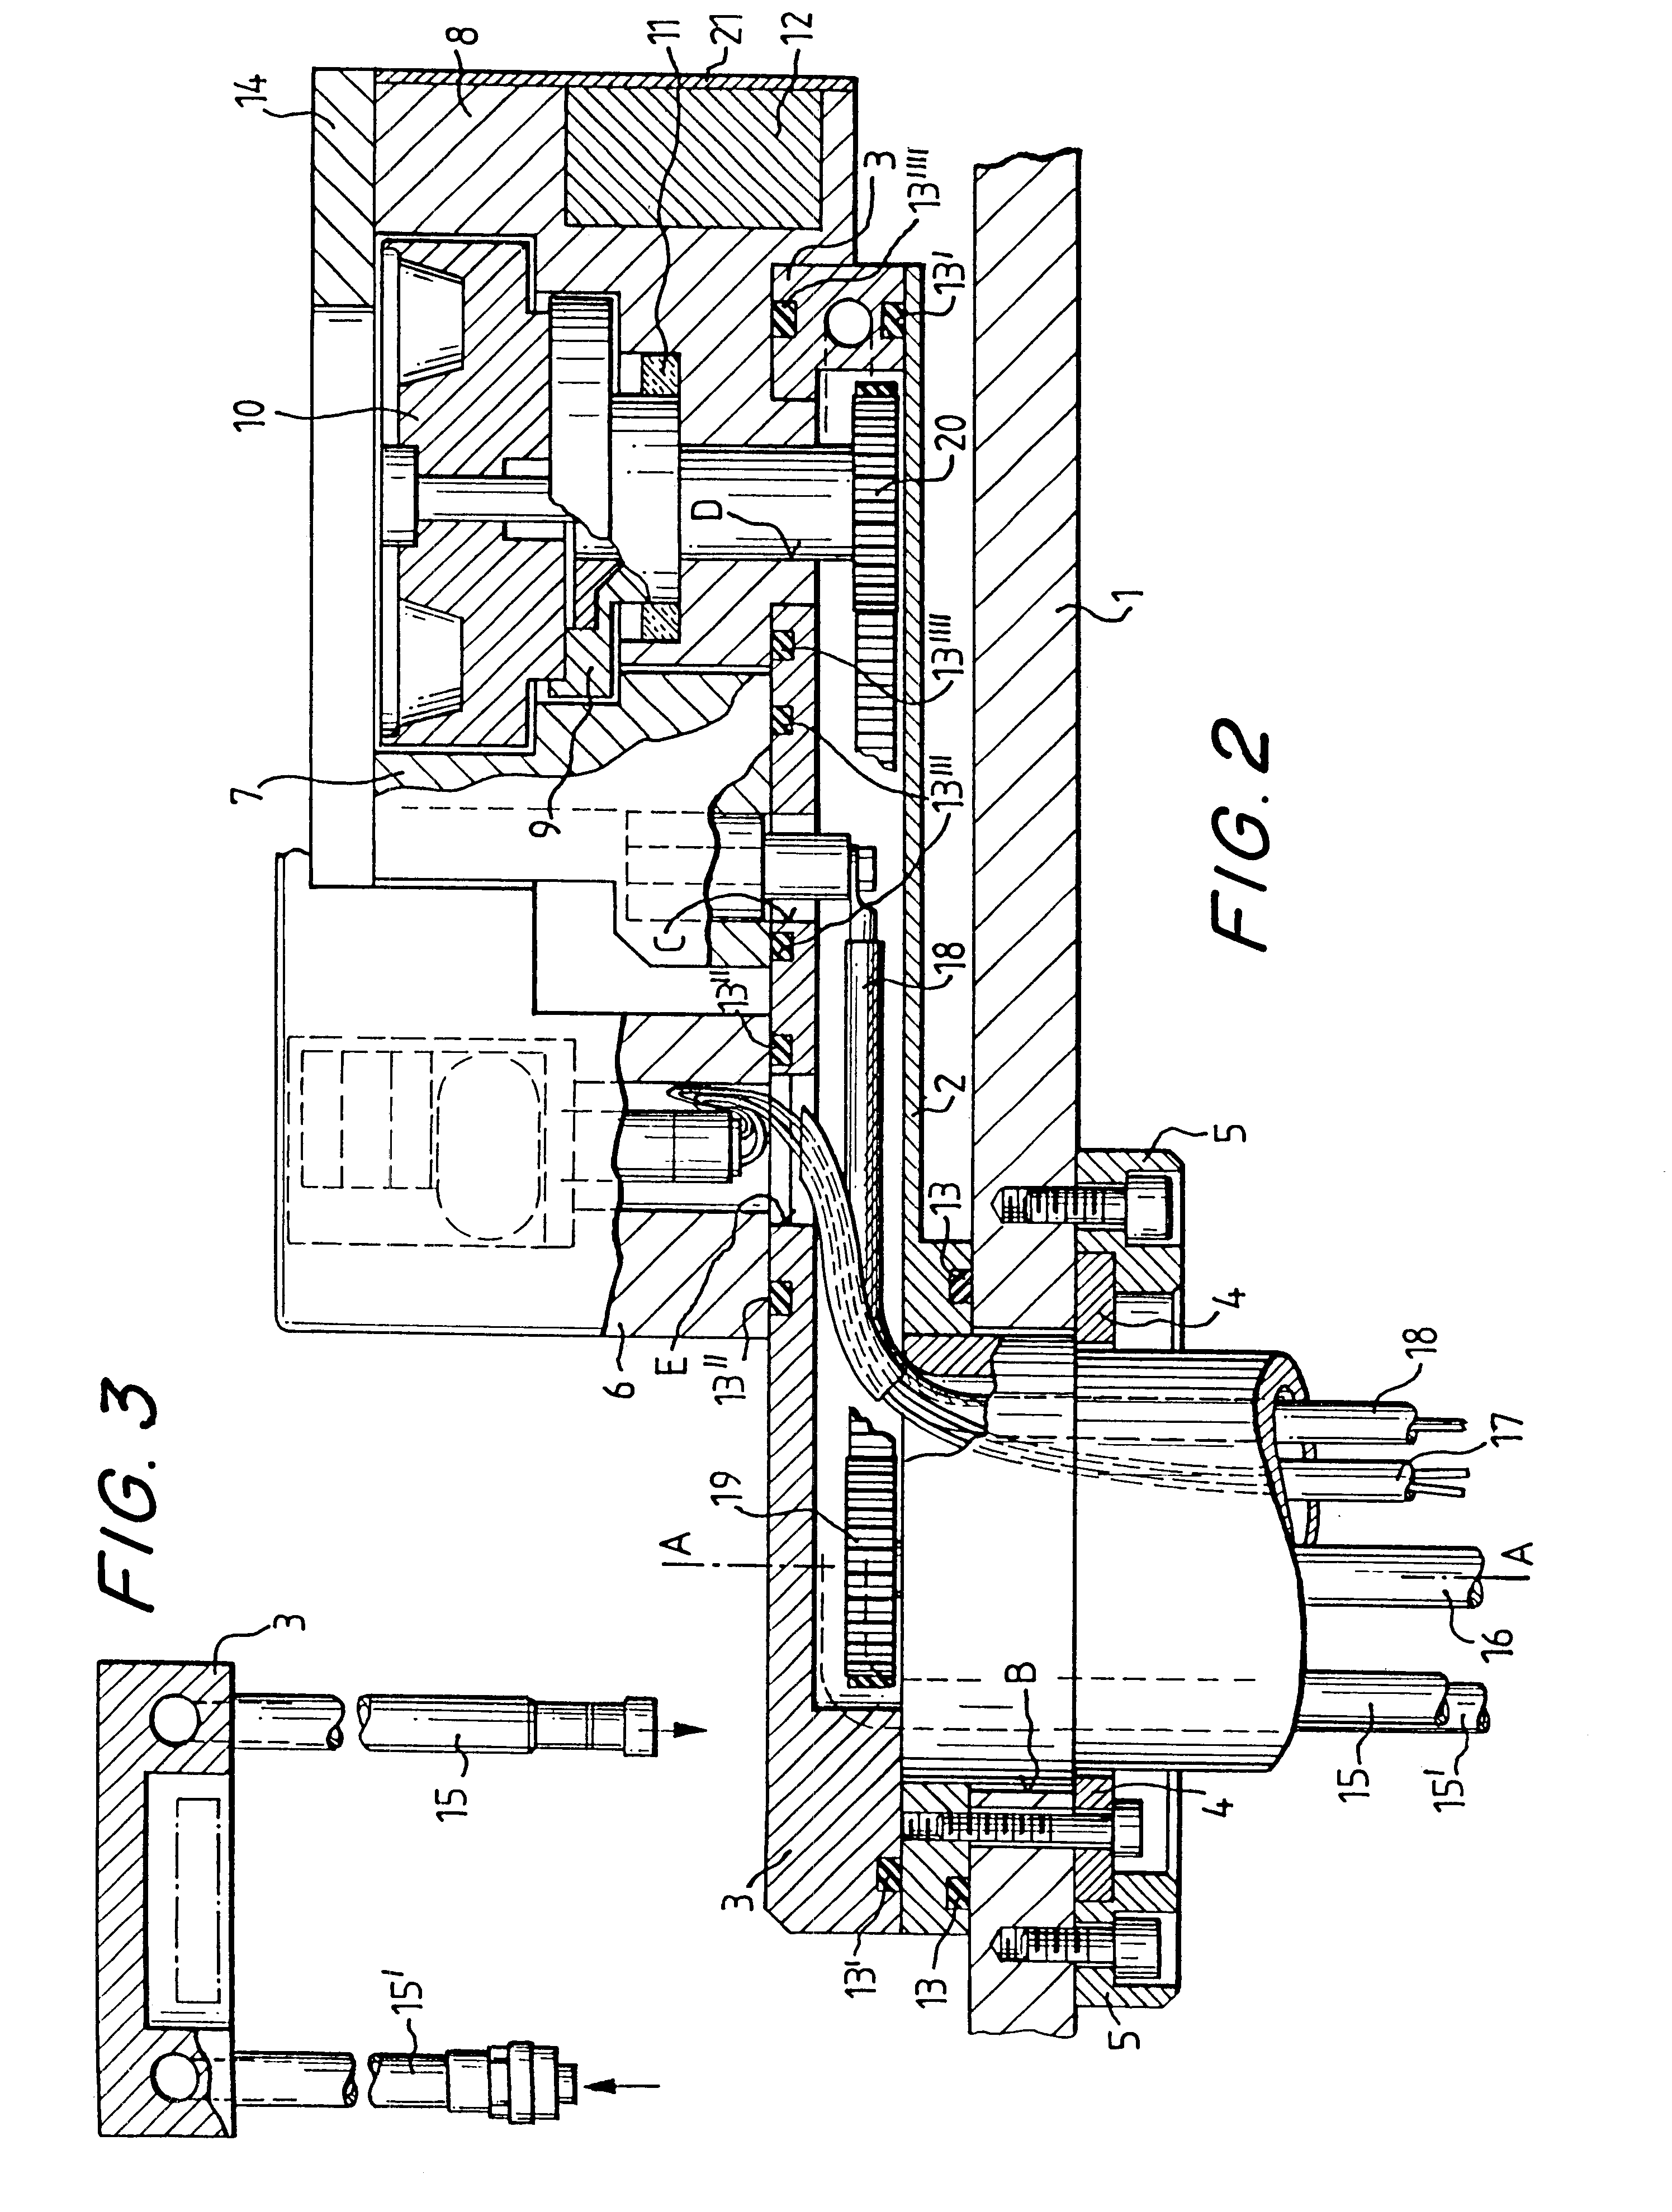 Apparatus and method for electron beam evaporation